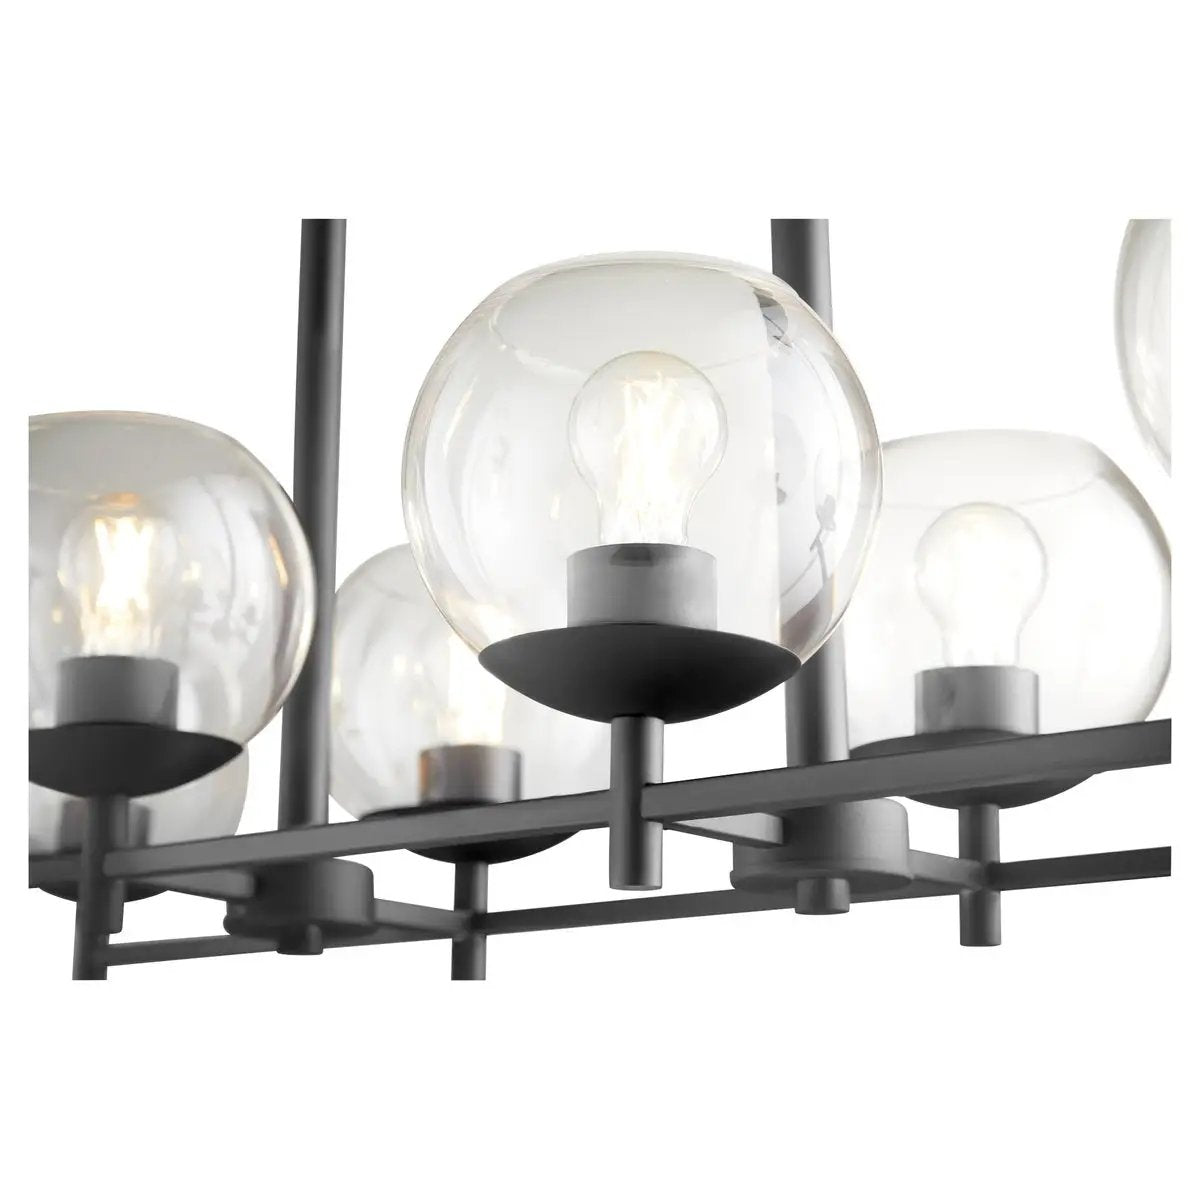 Mid Century Modern Island Lighting: A close-up of a chandelier with rounded, clear casings around its lights, creating a subtle and stylized look. This matte black fixture features strong angles and bold lines, complemented by more rounded profiles. Perfect for dining rooms, kitchens, and outdoor spaces.